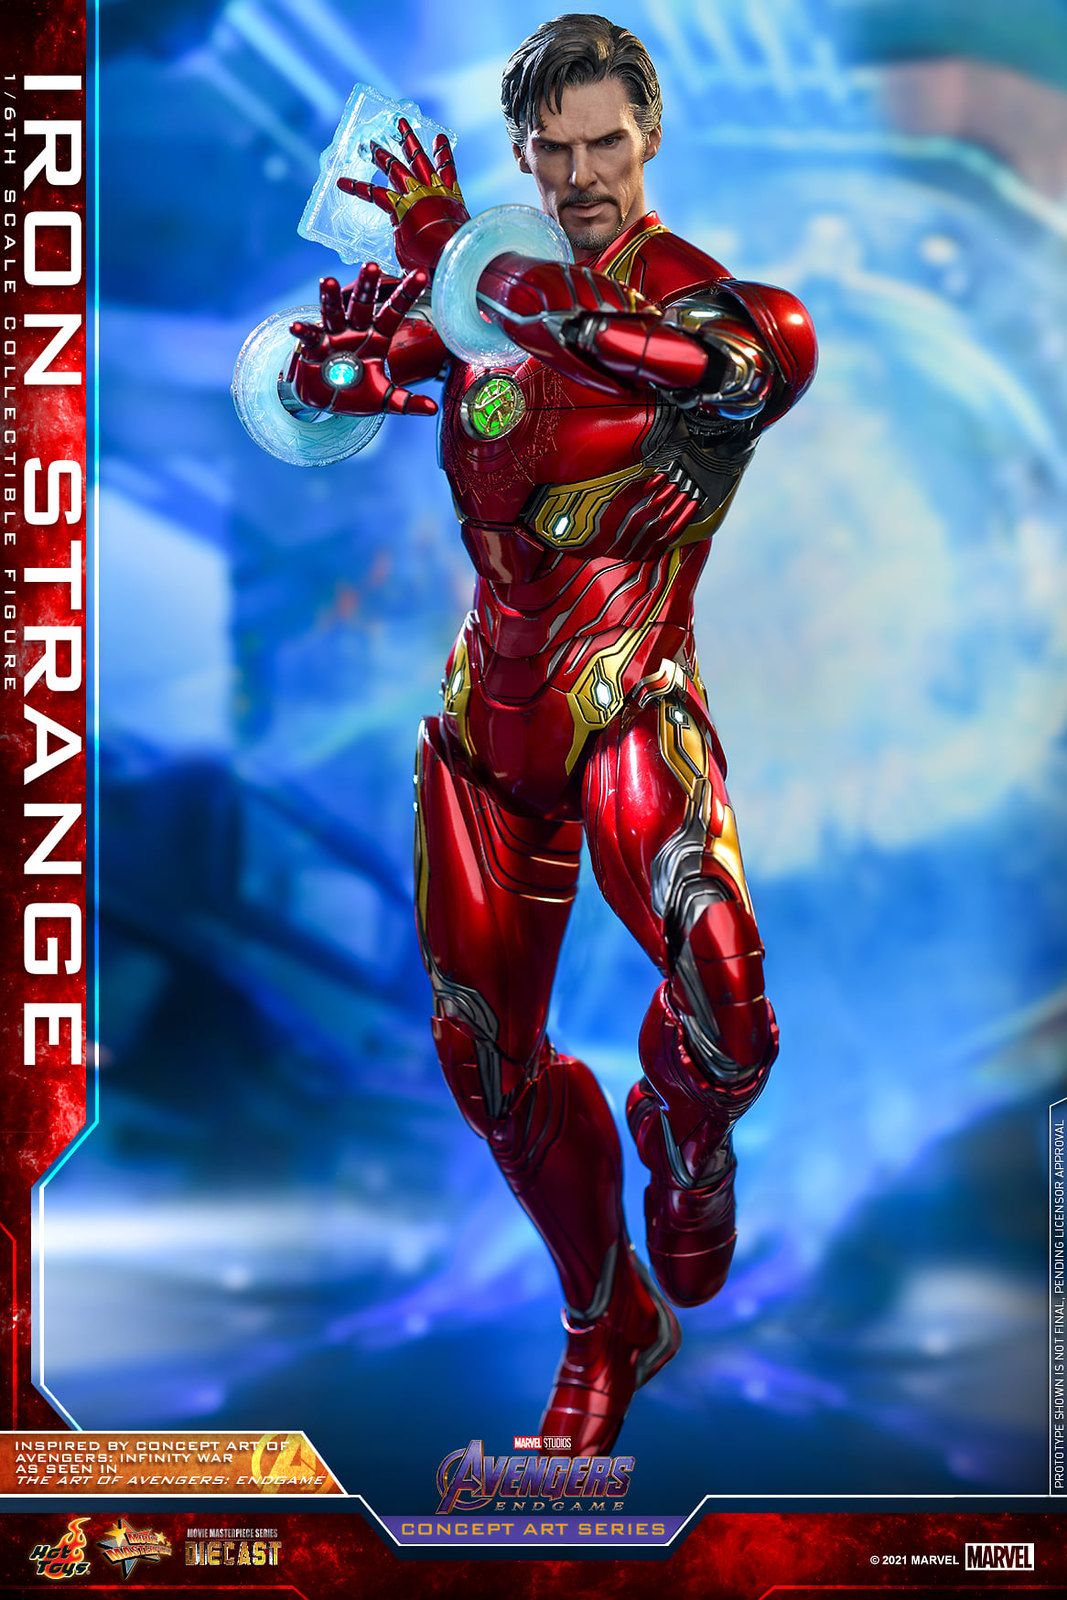 NEW PRODUCT: Hot Toys Avengers: Endgame (Concept Art Series) - 1/6th scale Iron Strange Collectible Figure 51312230345_046466612d_h